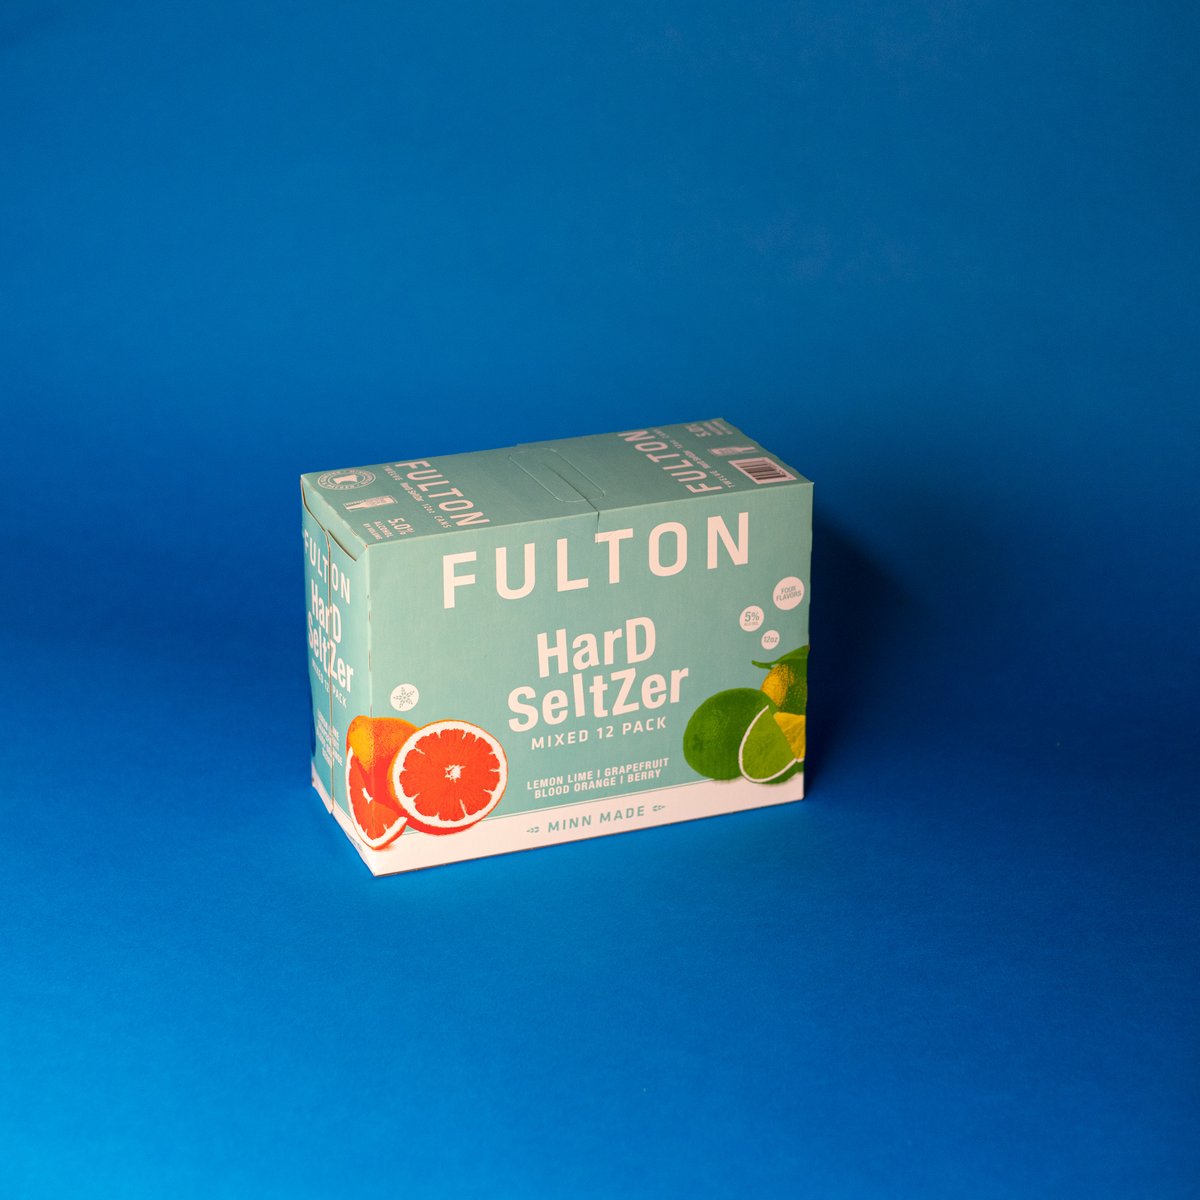 With 6 flavors and counting, what's your favorite Fulton Hard Seltzer?
#HaveMoreFun #StayHomeMN